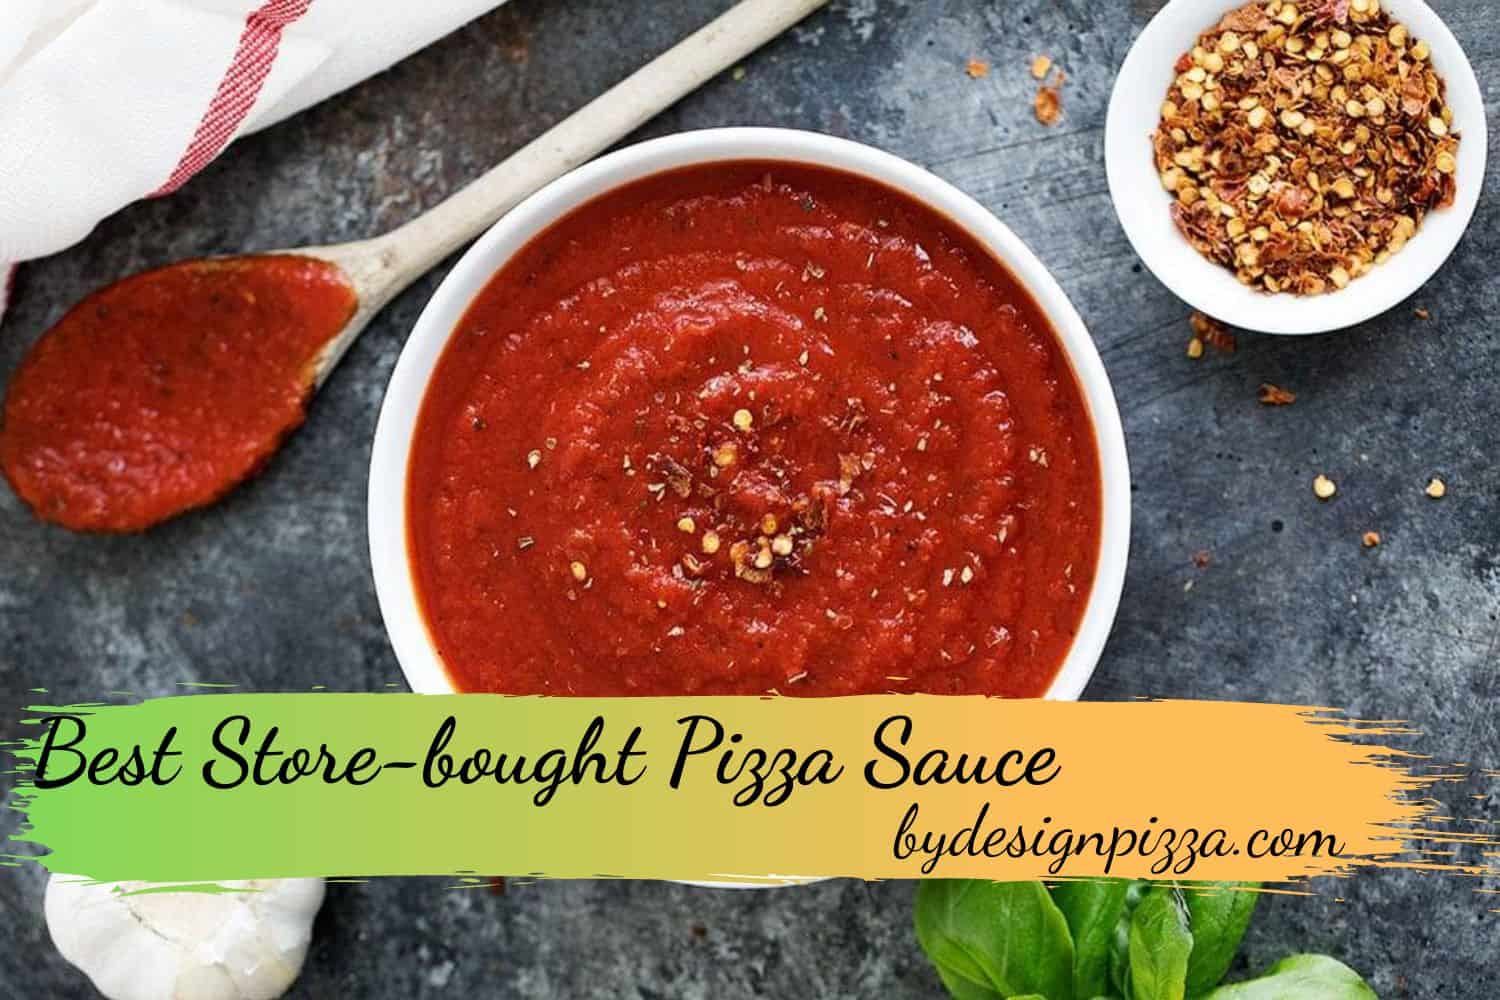 Best Store-bought Pizza Sauce